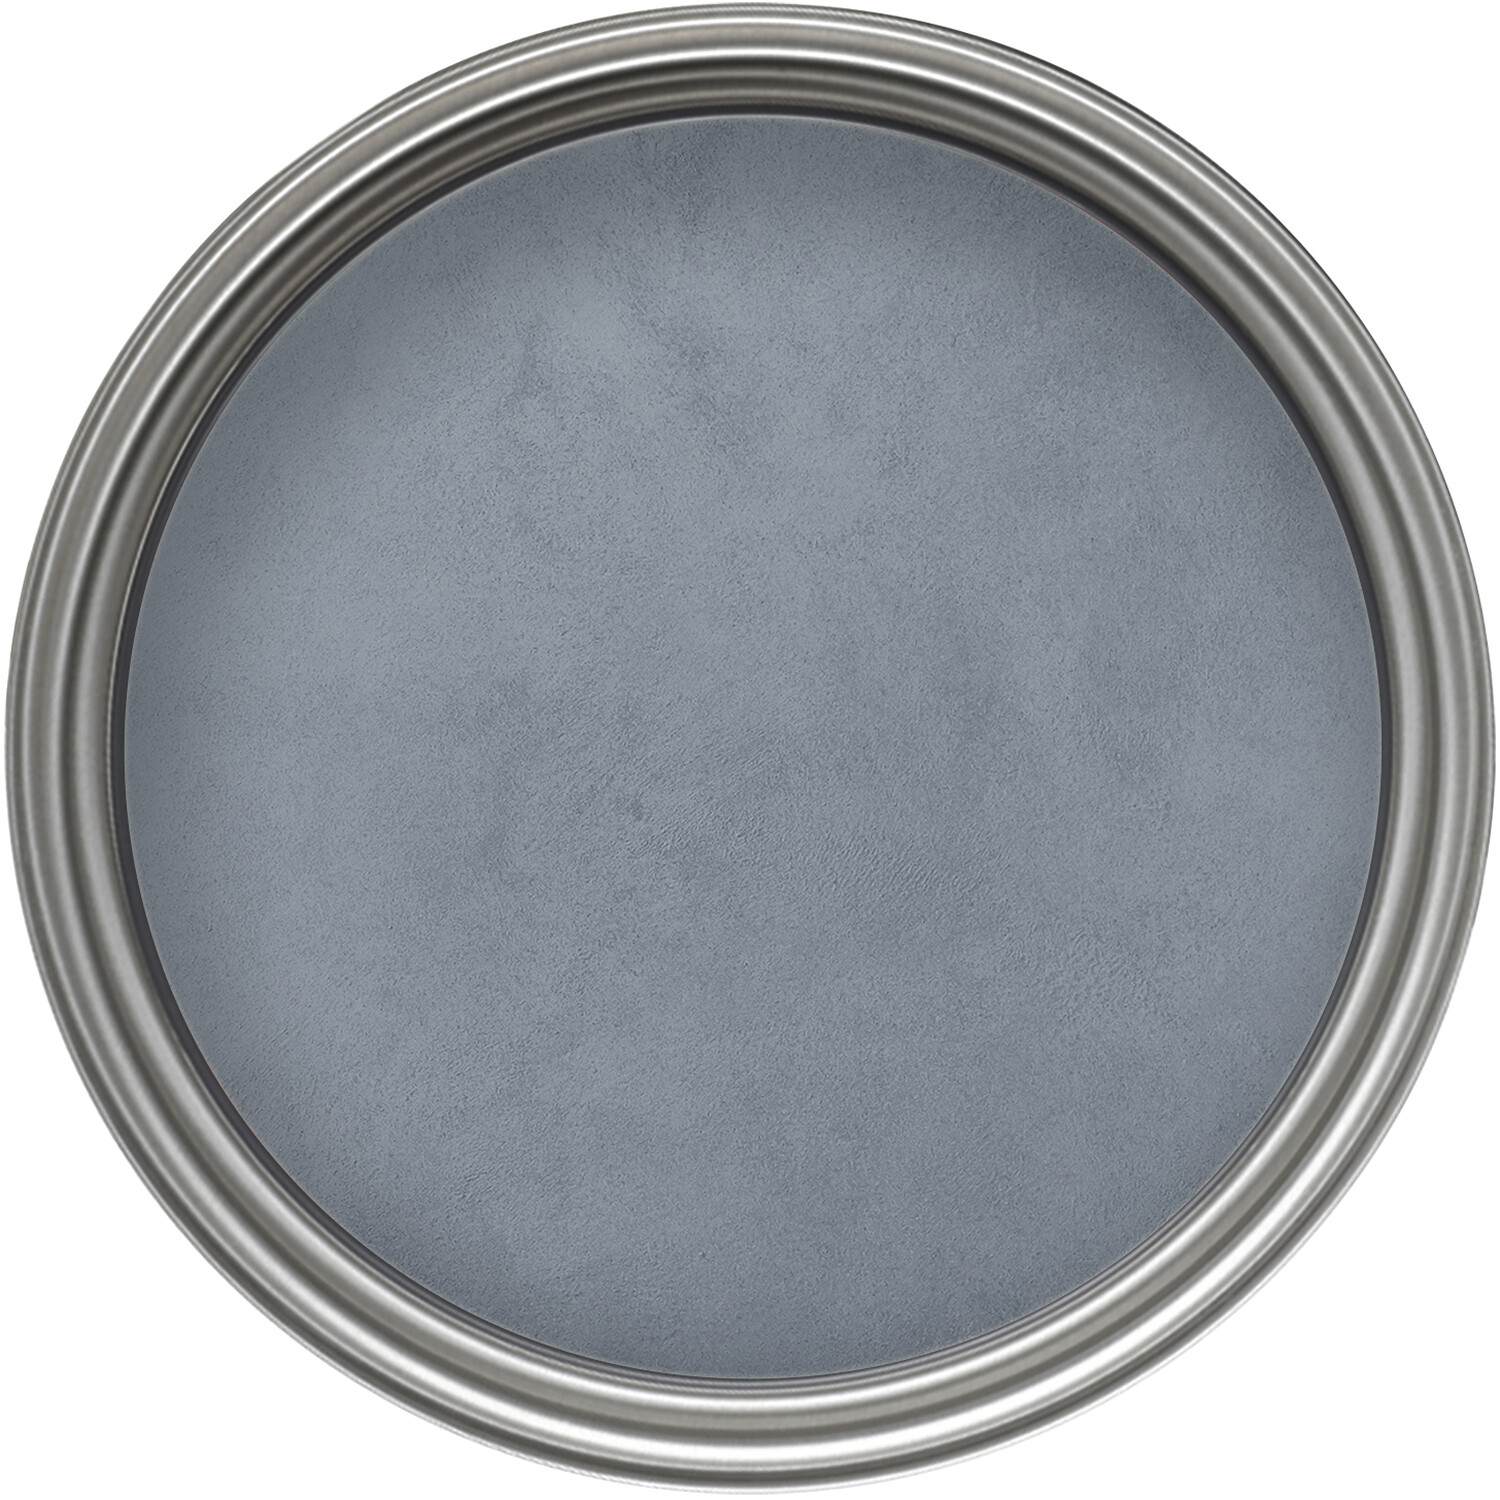 Crown Crafted Walls Mid Grey Suede Textured Finish Paint 2.5L Image 3